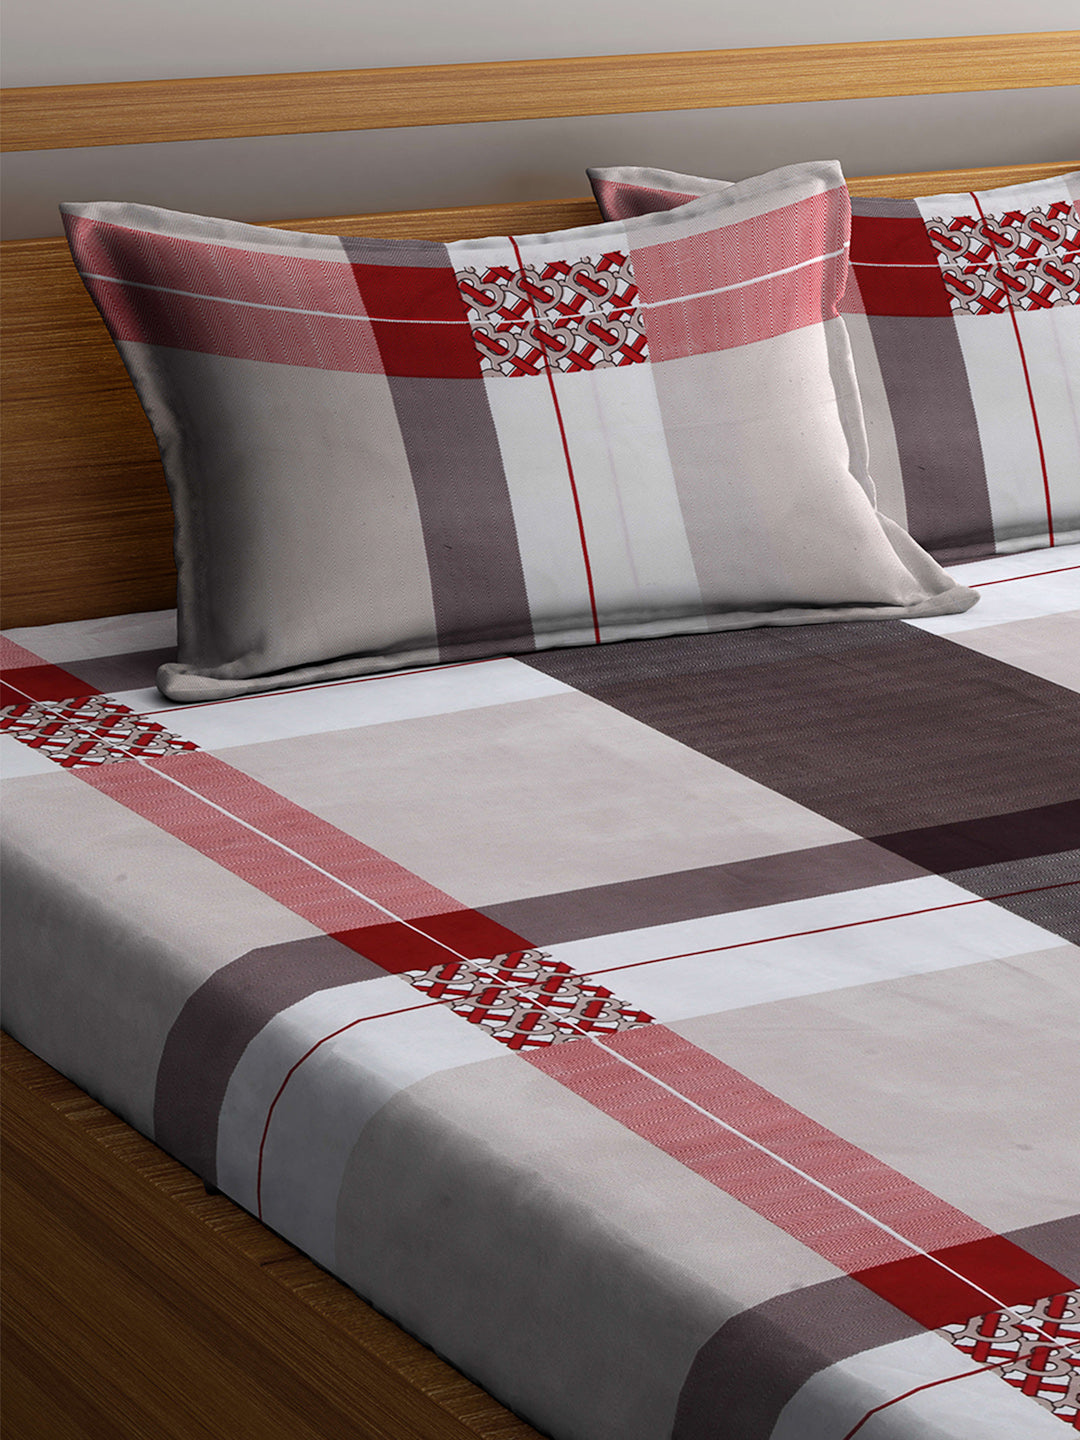 Arrabi Beige Stripes TC Cotton Blend Double Size Fitted Bedsheet with 2 Pillow Cover ( 250 x 225 cm)